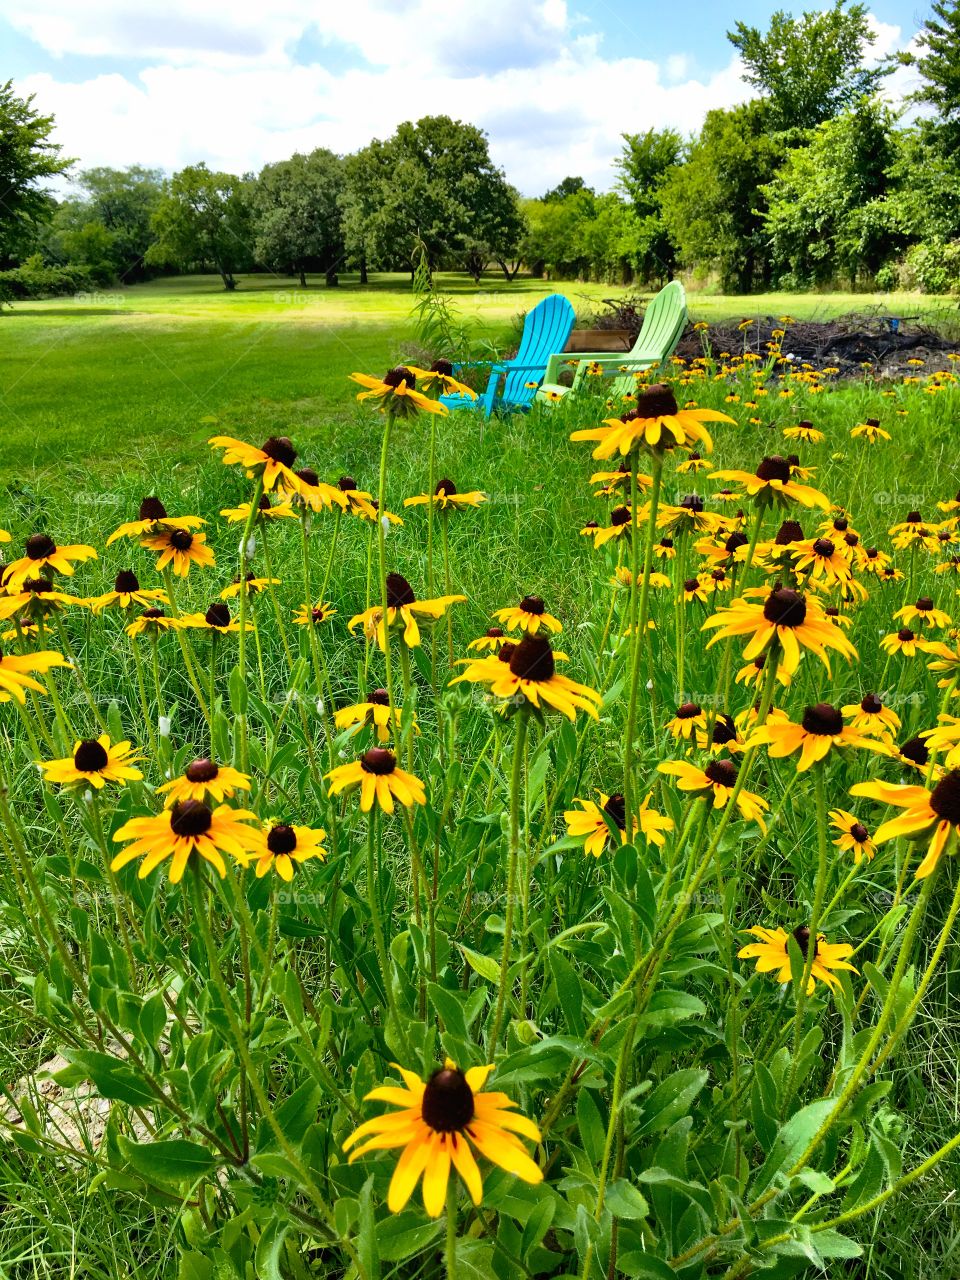 Bright yellow sunflowers growing in front of colorful lawn chairs with a field and oak trees in the background 